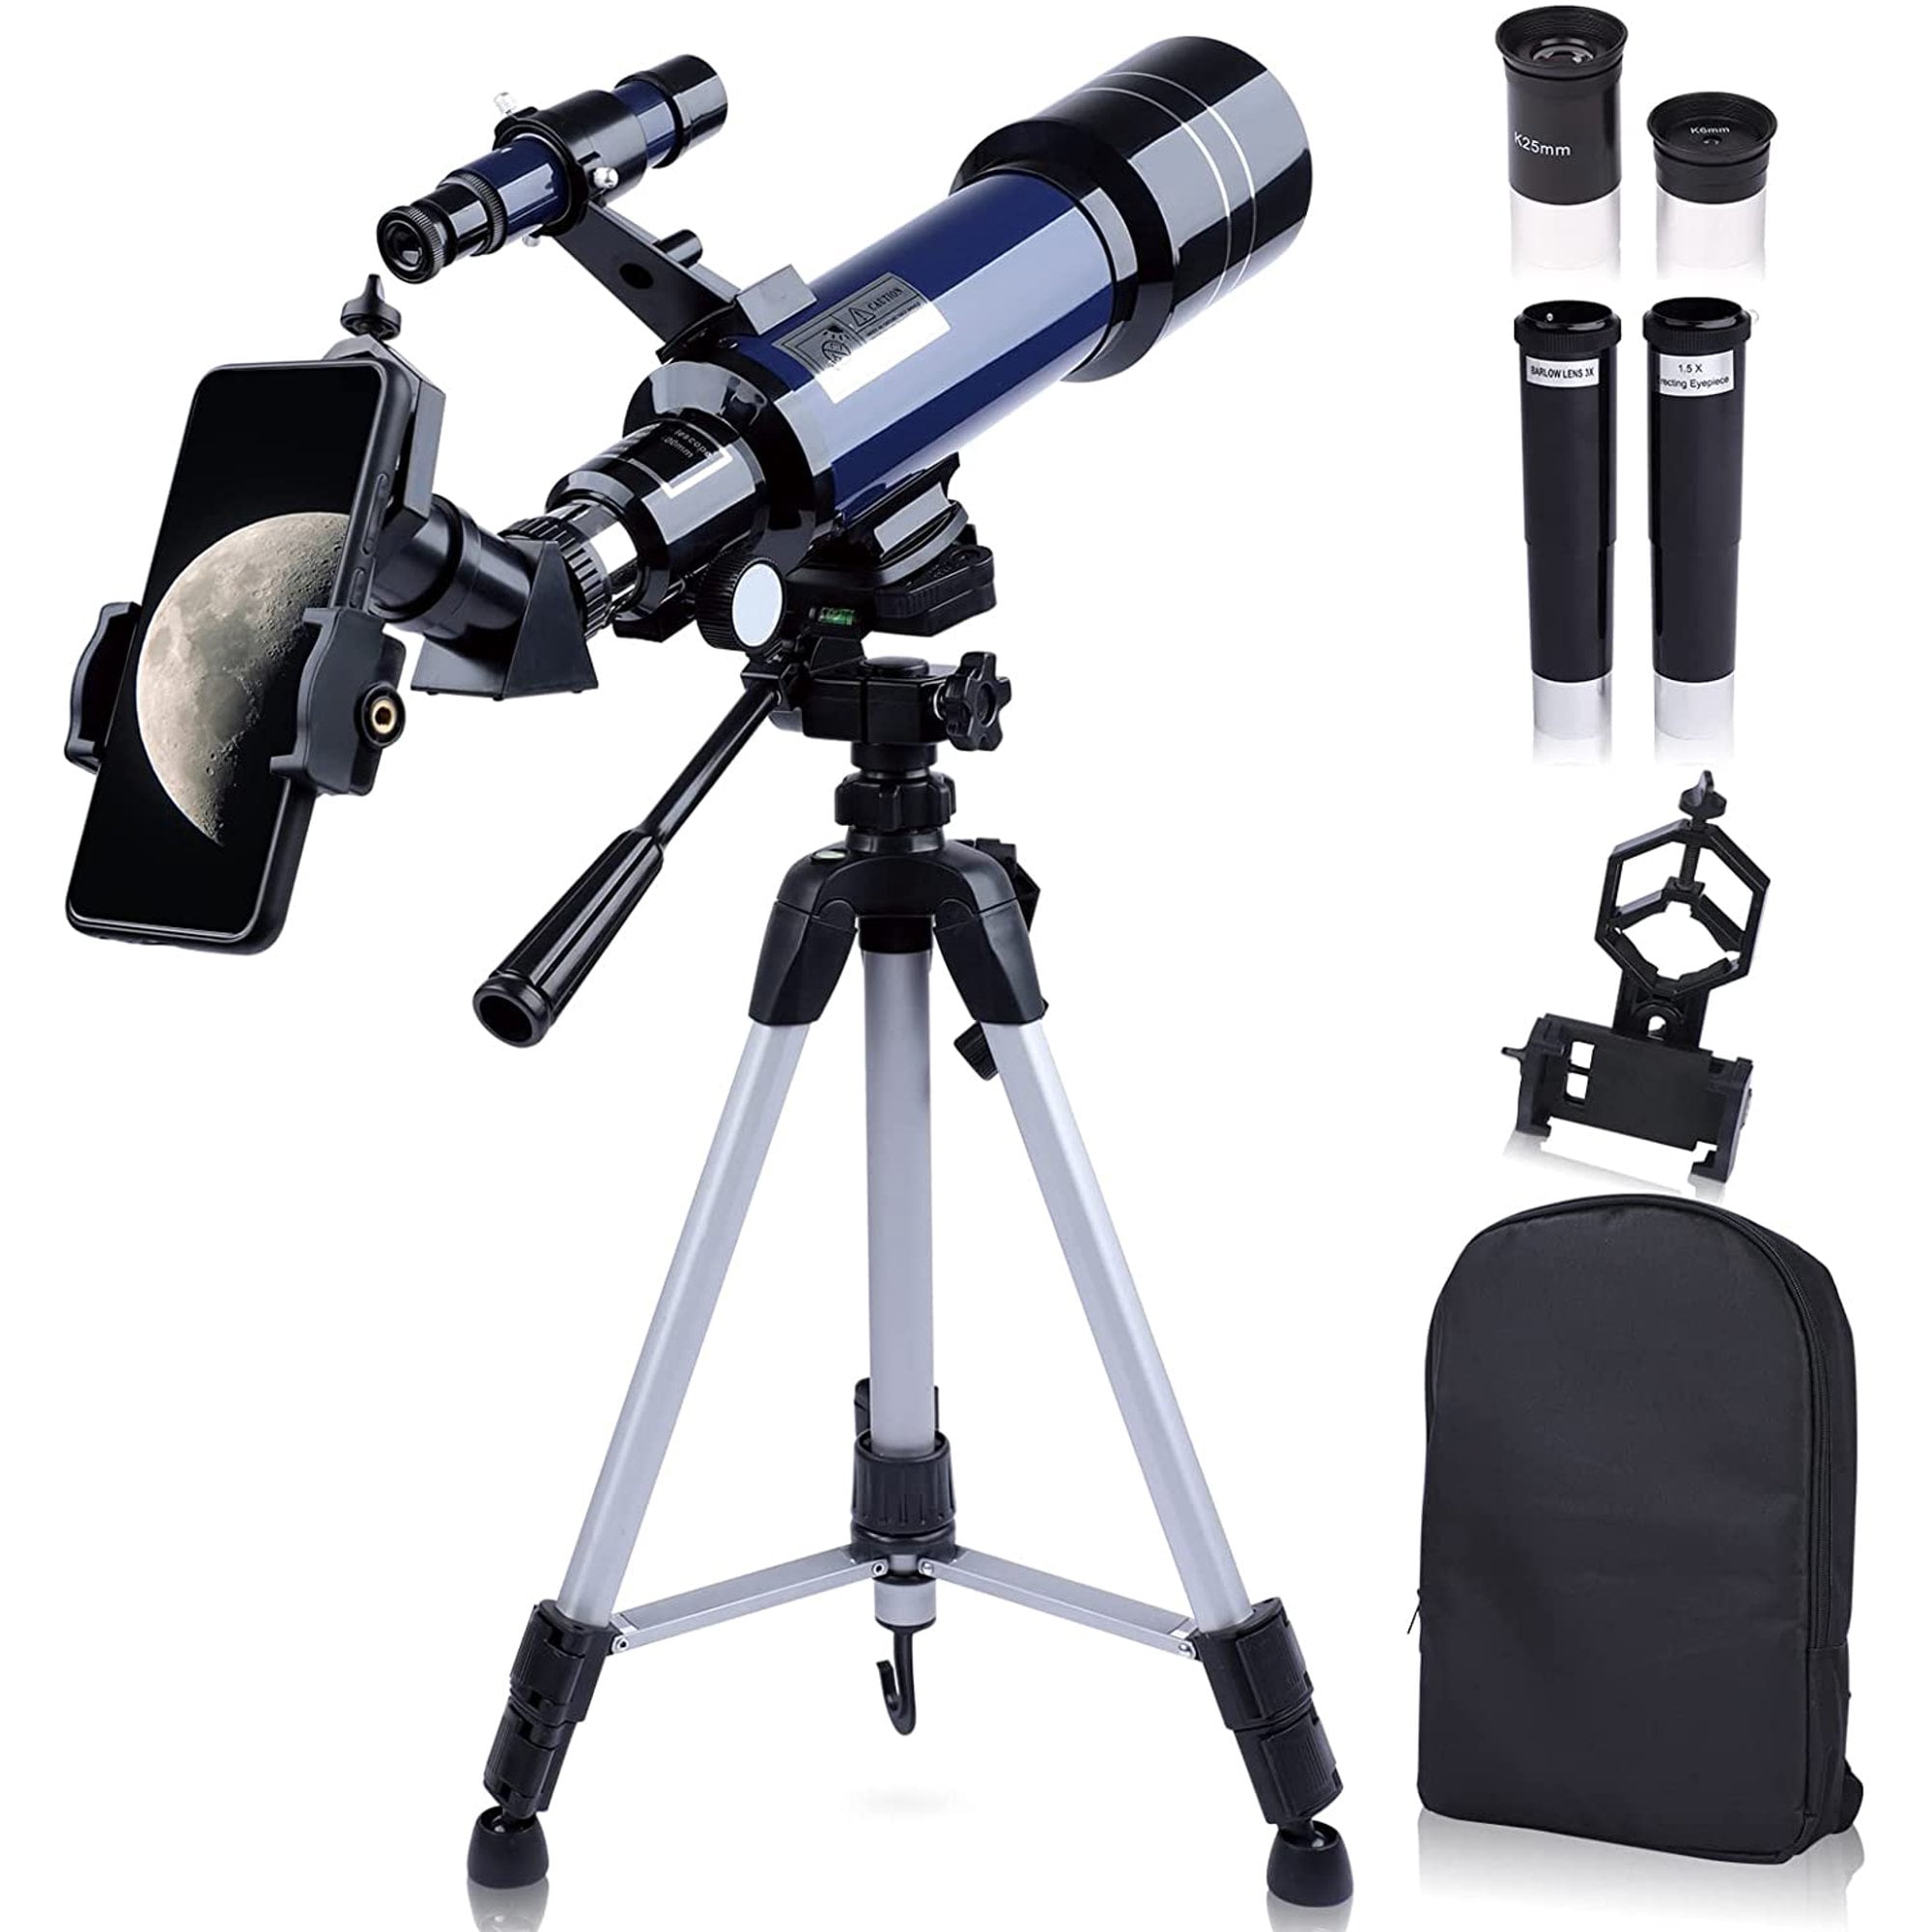 Telescope for Kids Beginners Adults 70mm Aperture 400mm AZ Mount Astronomical Refracting Telescope with Adjustable Tripod Perfect Telescope Gift for Kids 